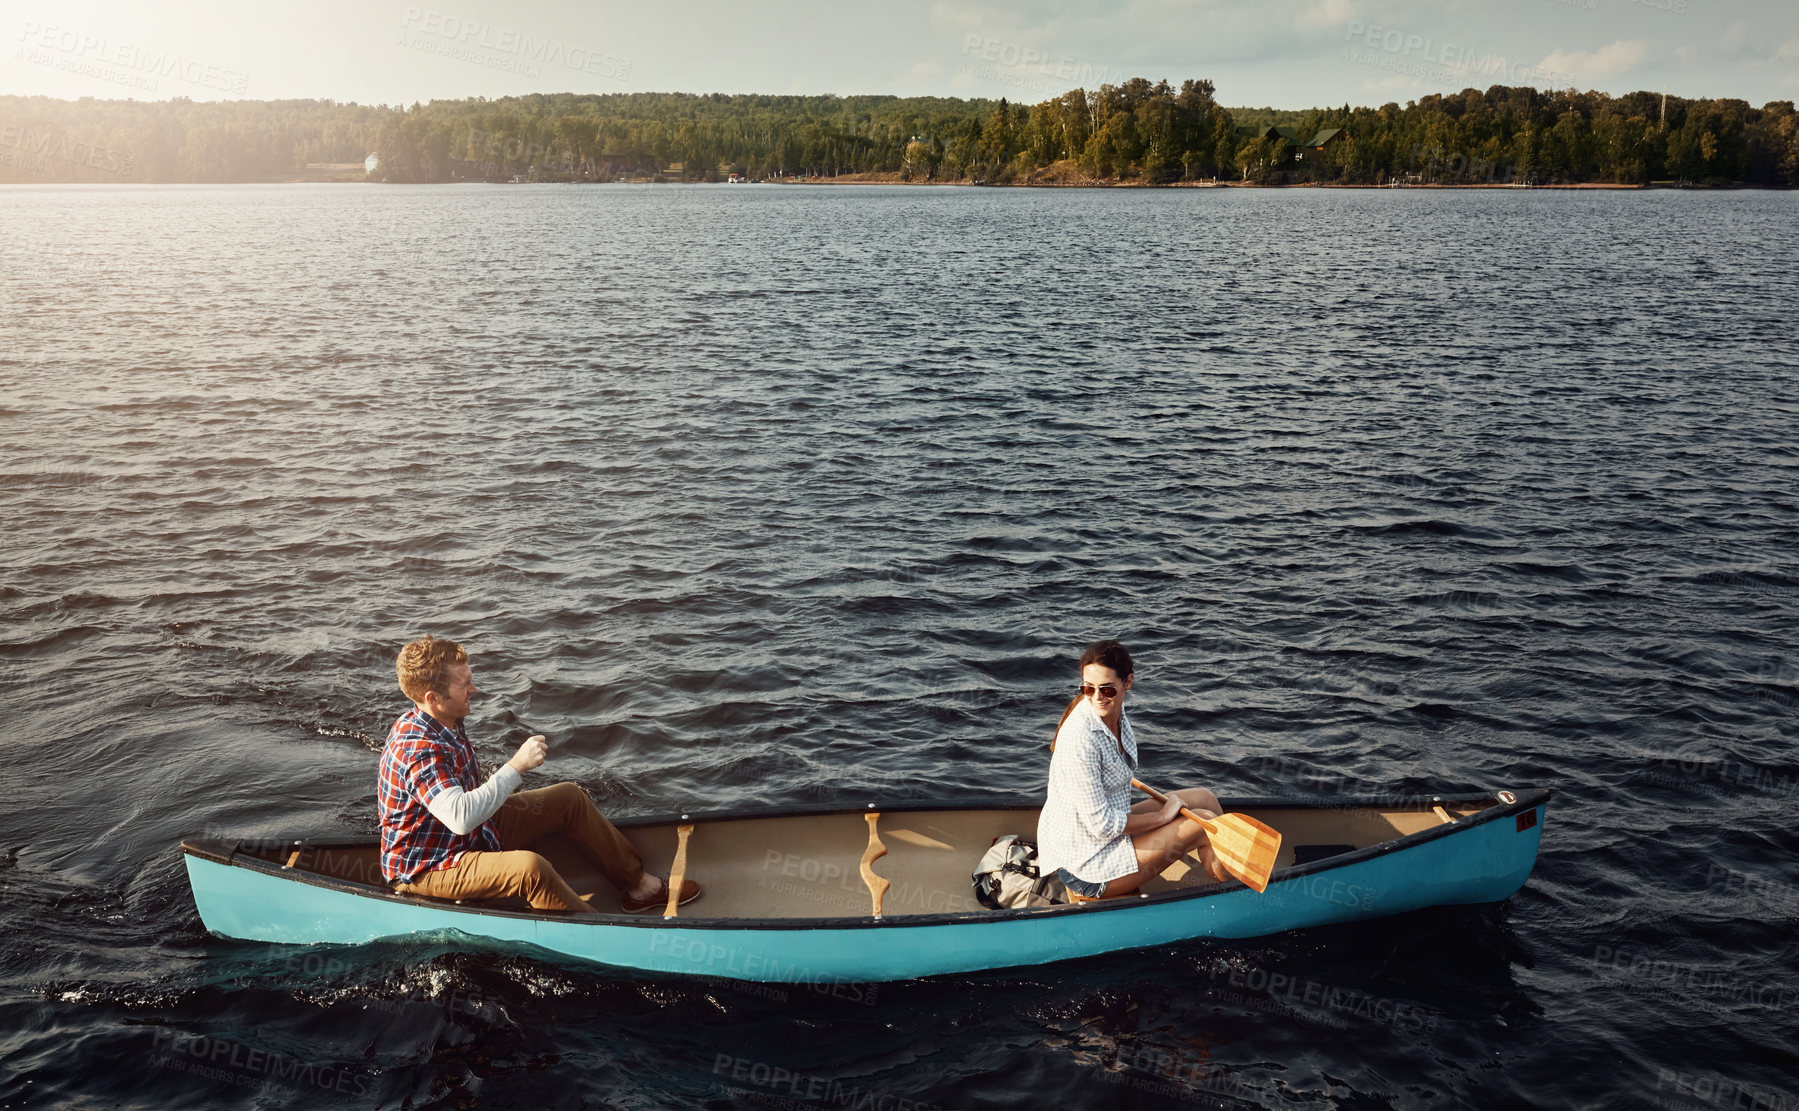 Buy stock photo Shot of a young couple rowing a boat out on the lake